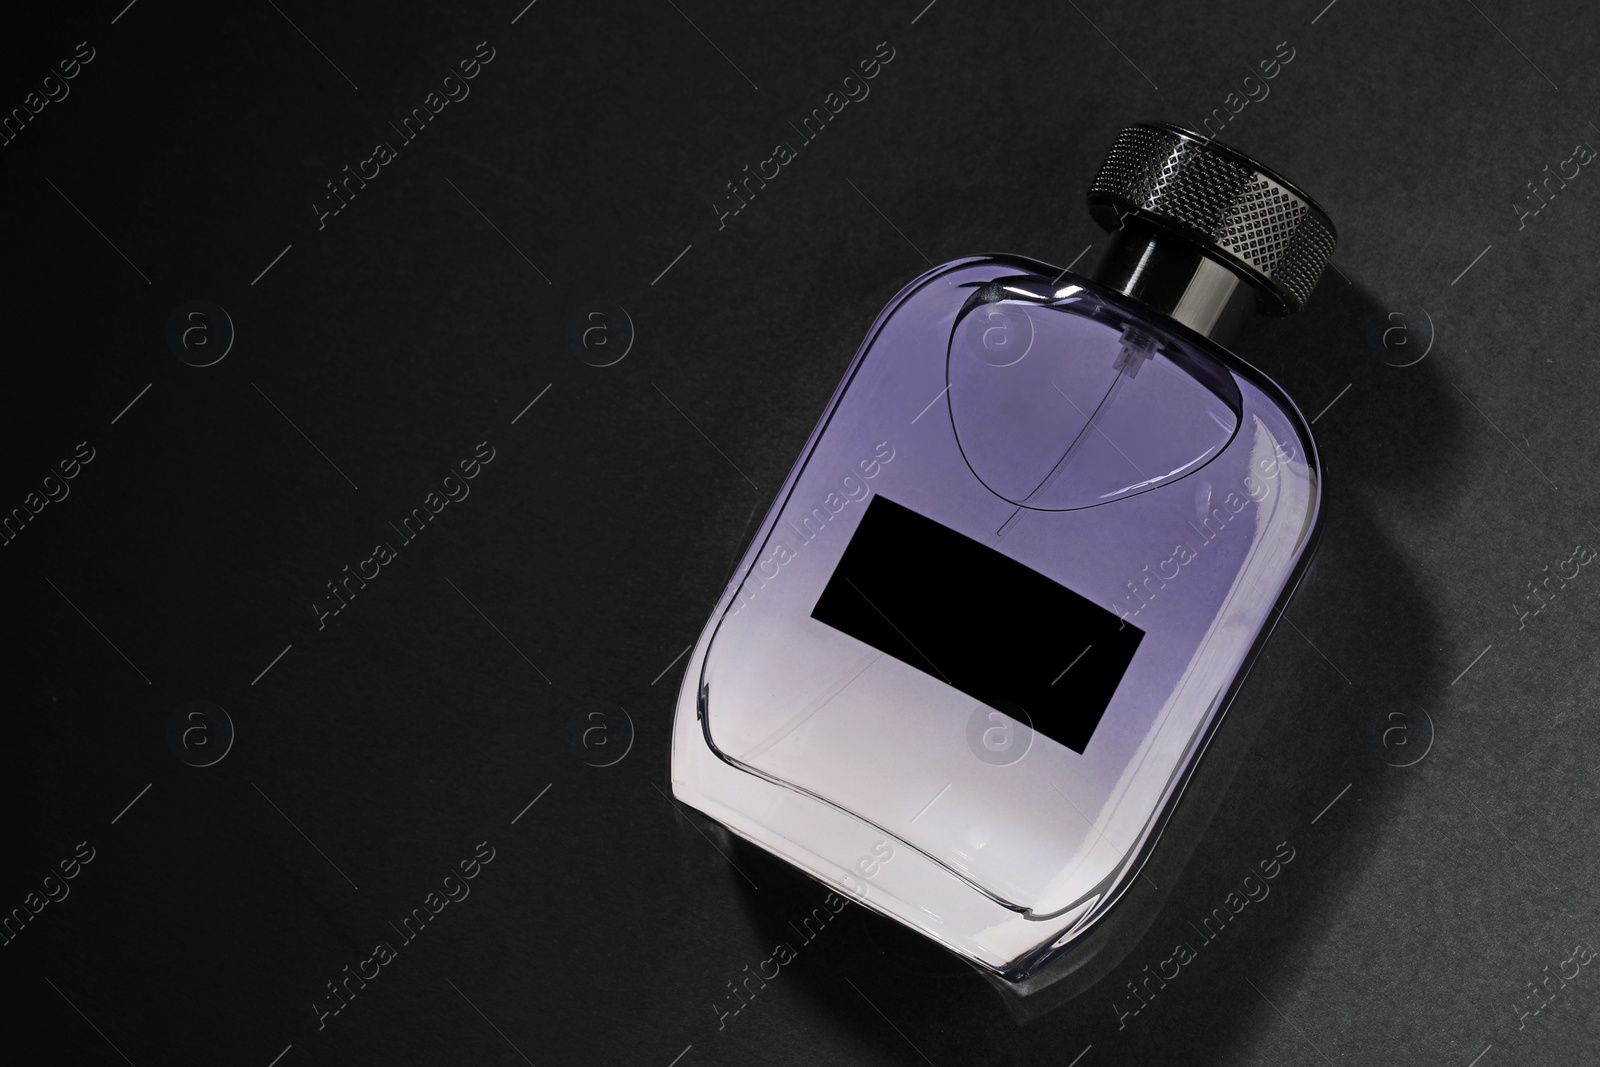 Photo of Luxury men`s perfume in bottle on black background, top view. Space for text